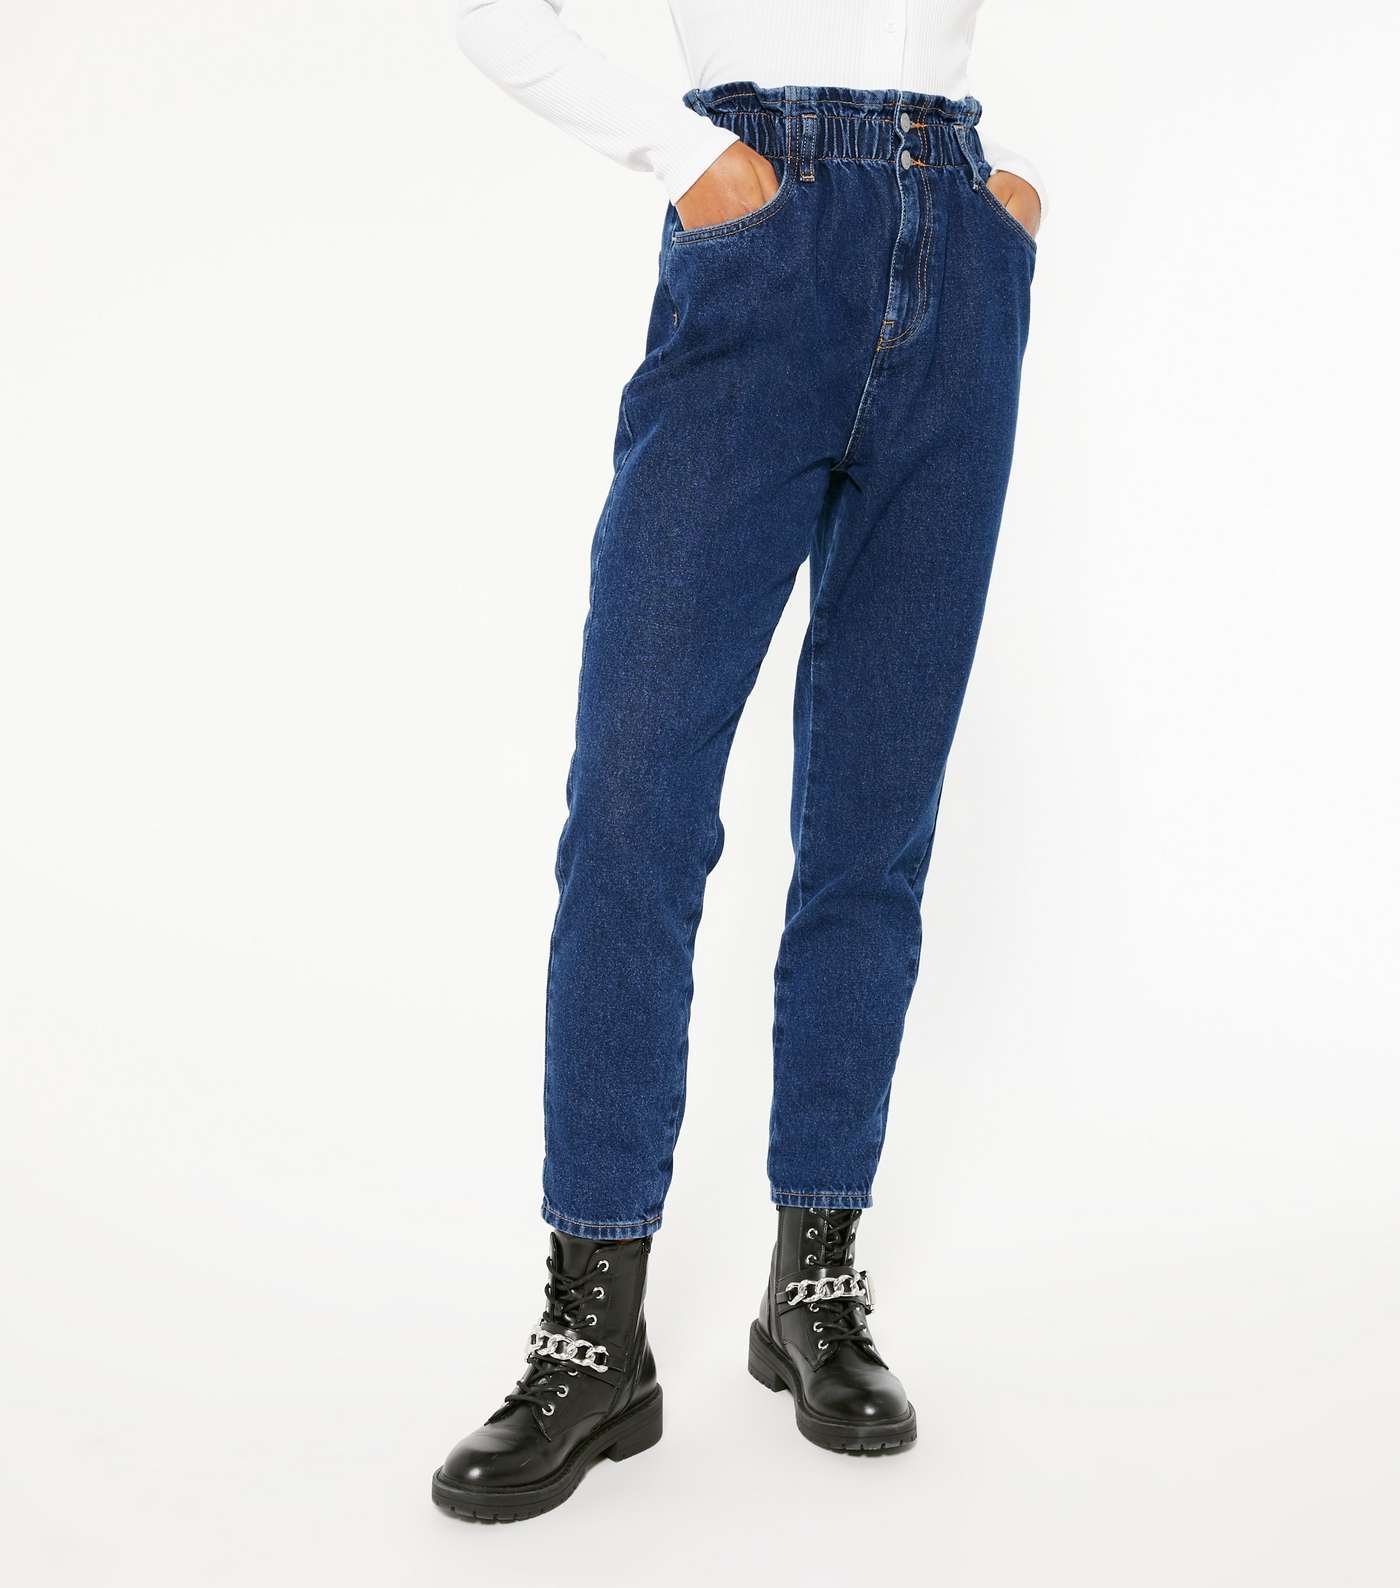 Blue Rinse Wash Elasticated High Waist Dayna Tapered Jeans Image 2